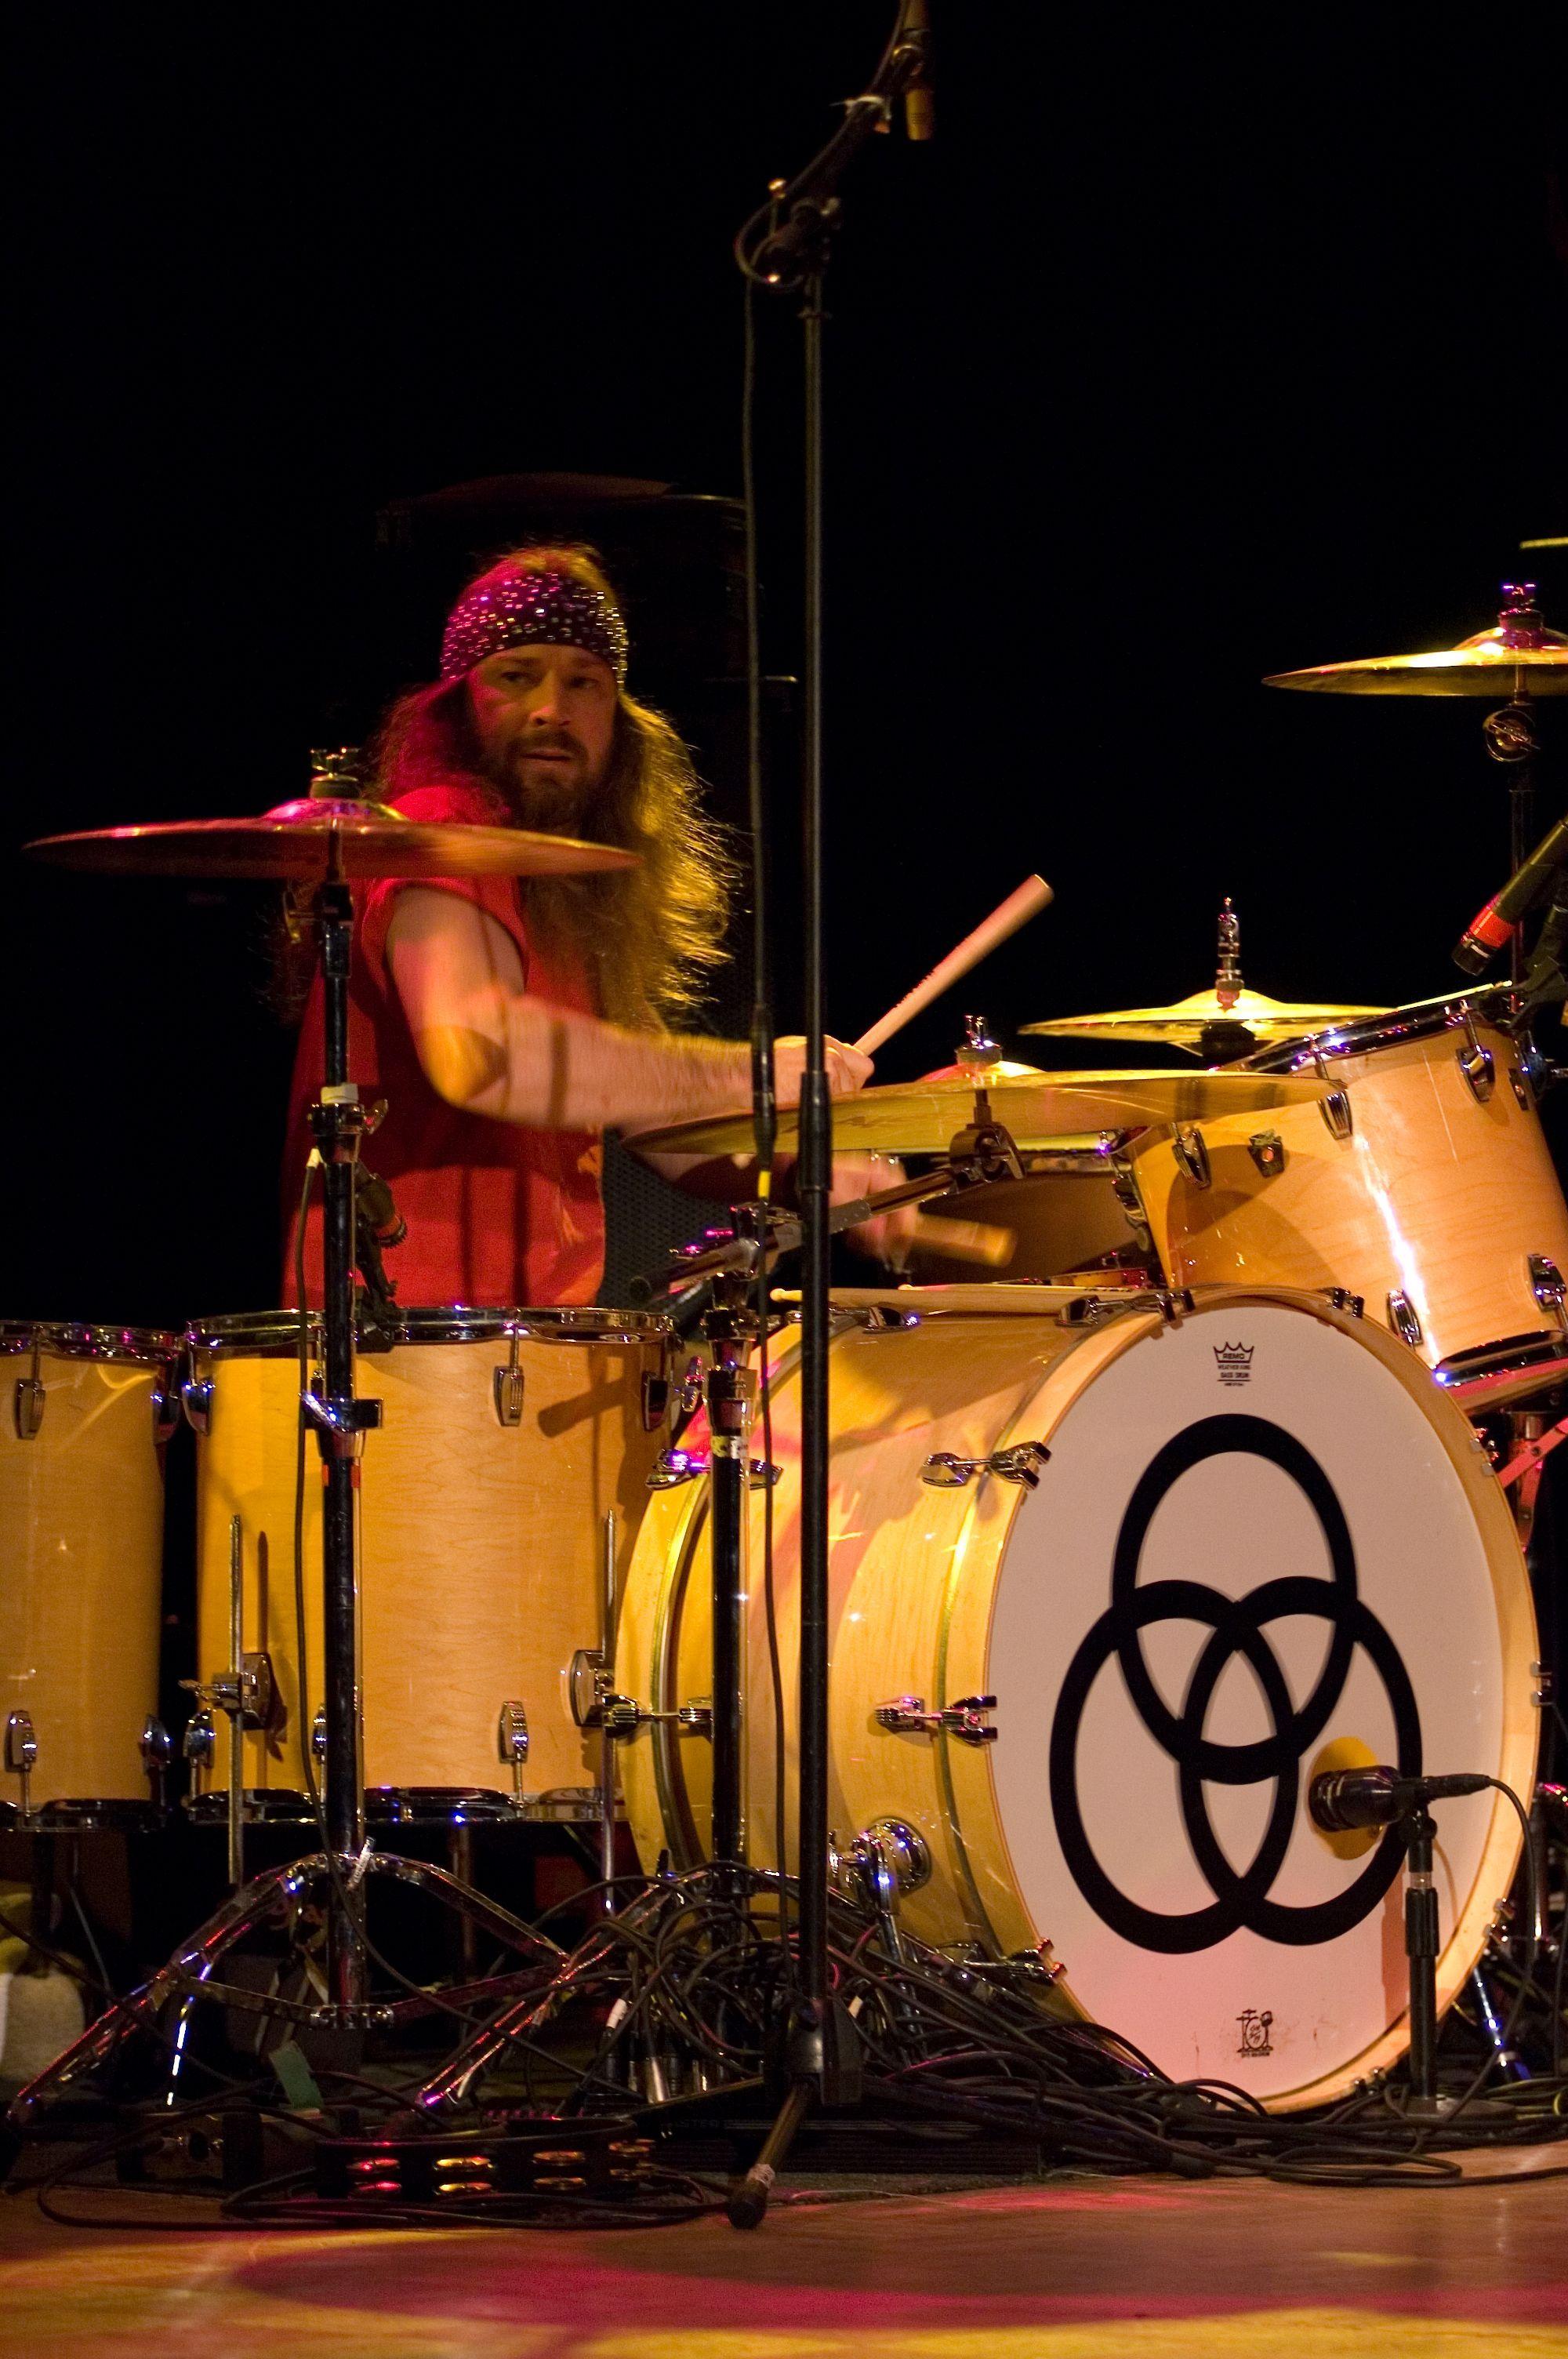 John Bonham.no it's not. Wow, this is what happens when you just